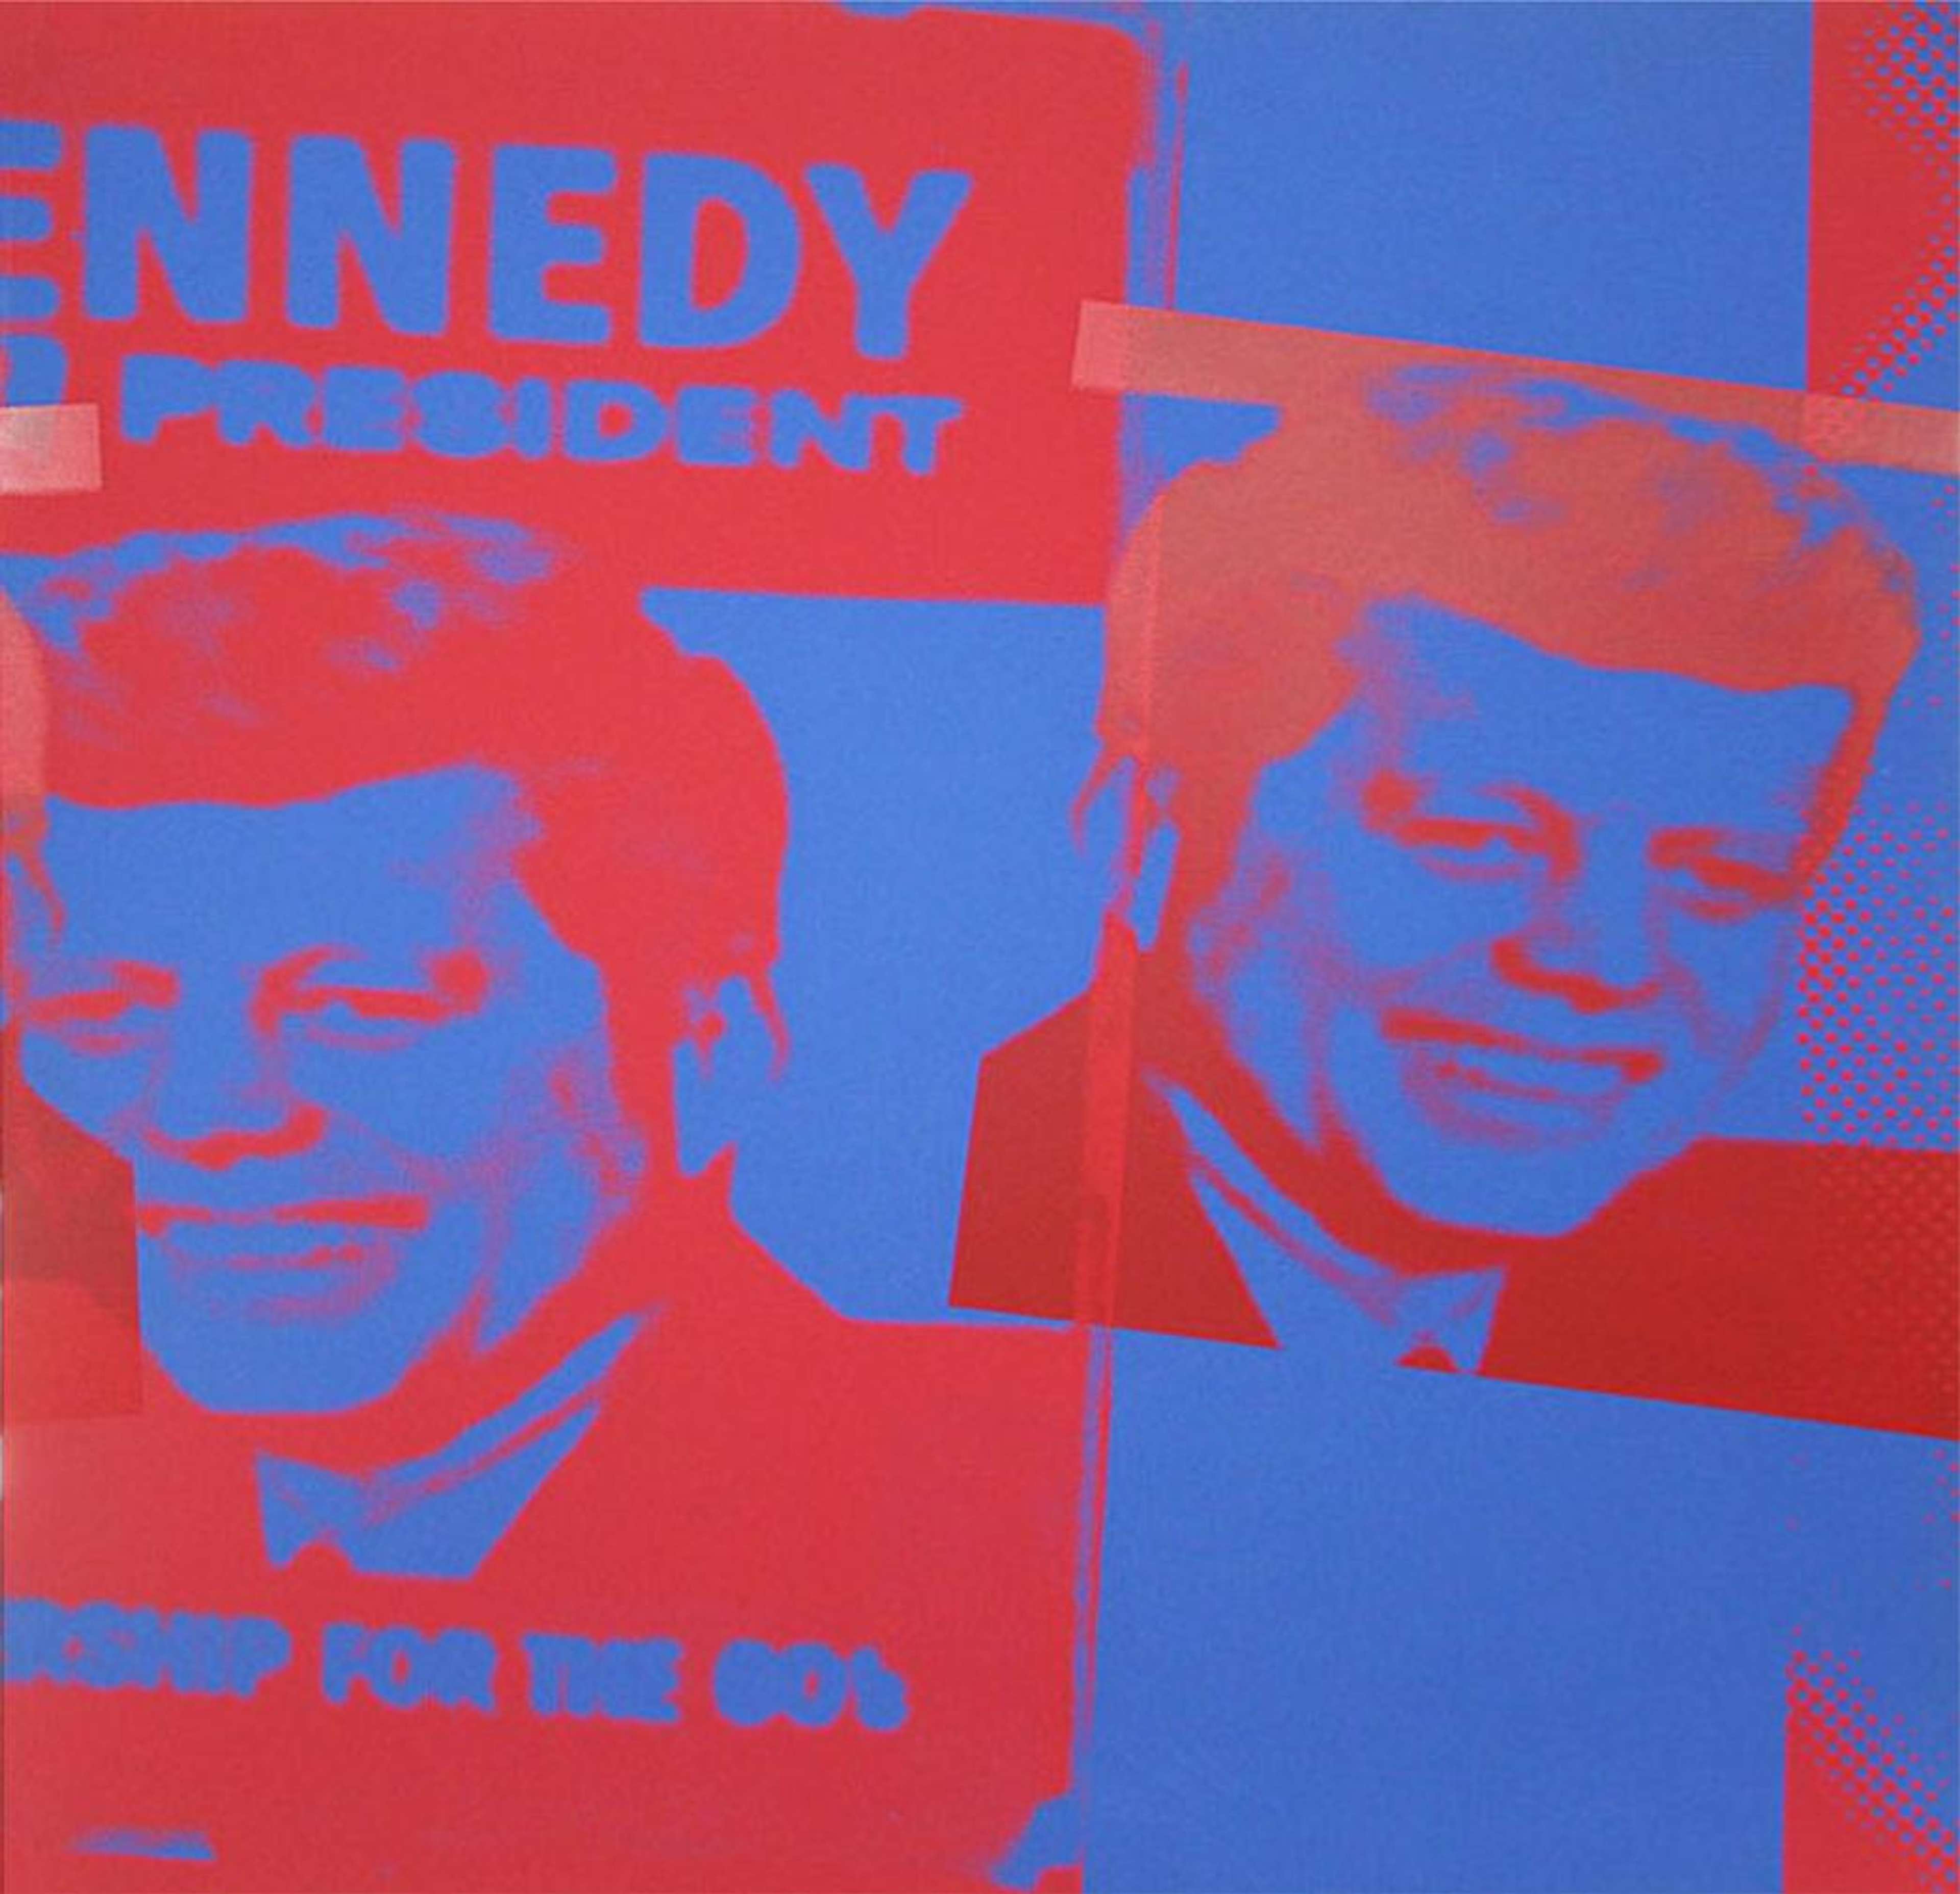 This print shows an image taken from President John F. Kennedy’s presidential campaign. It is depicted in bright red and blue.